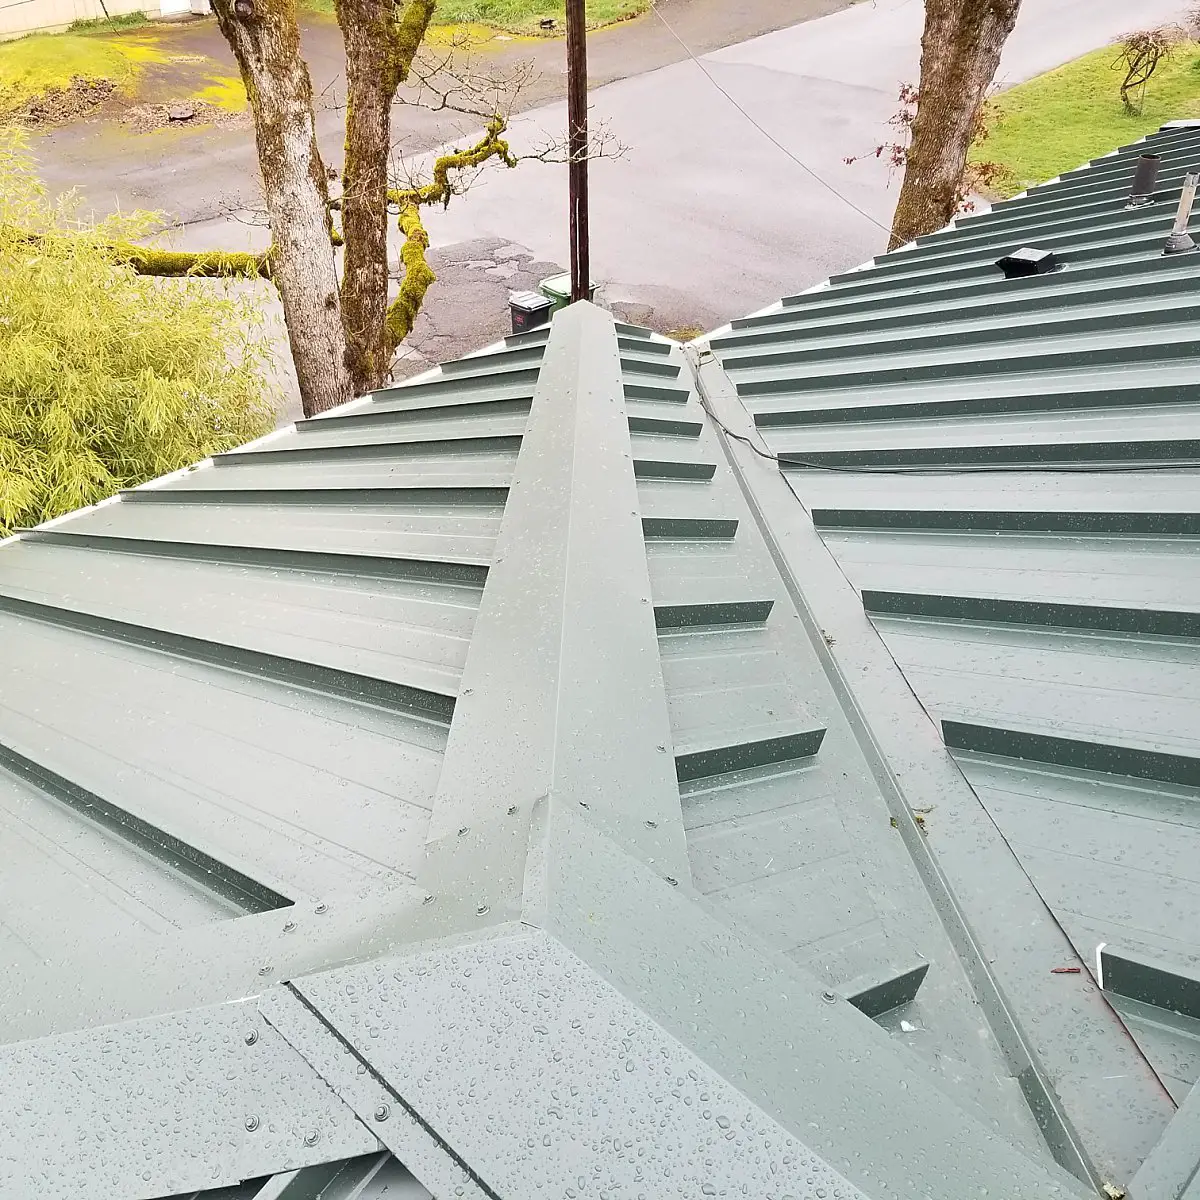 Can You Paint a Metal Roof?